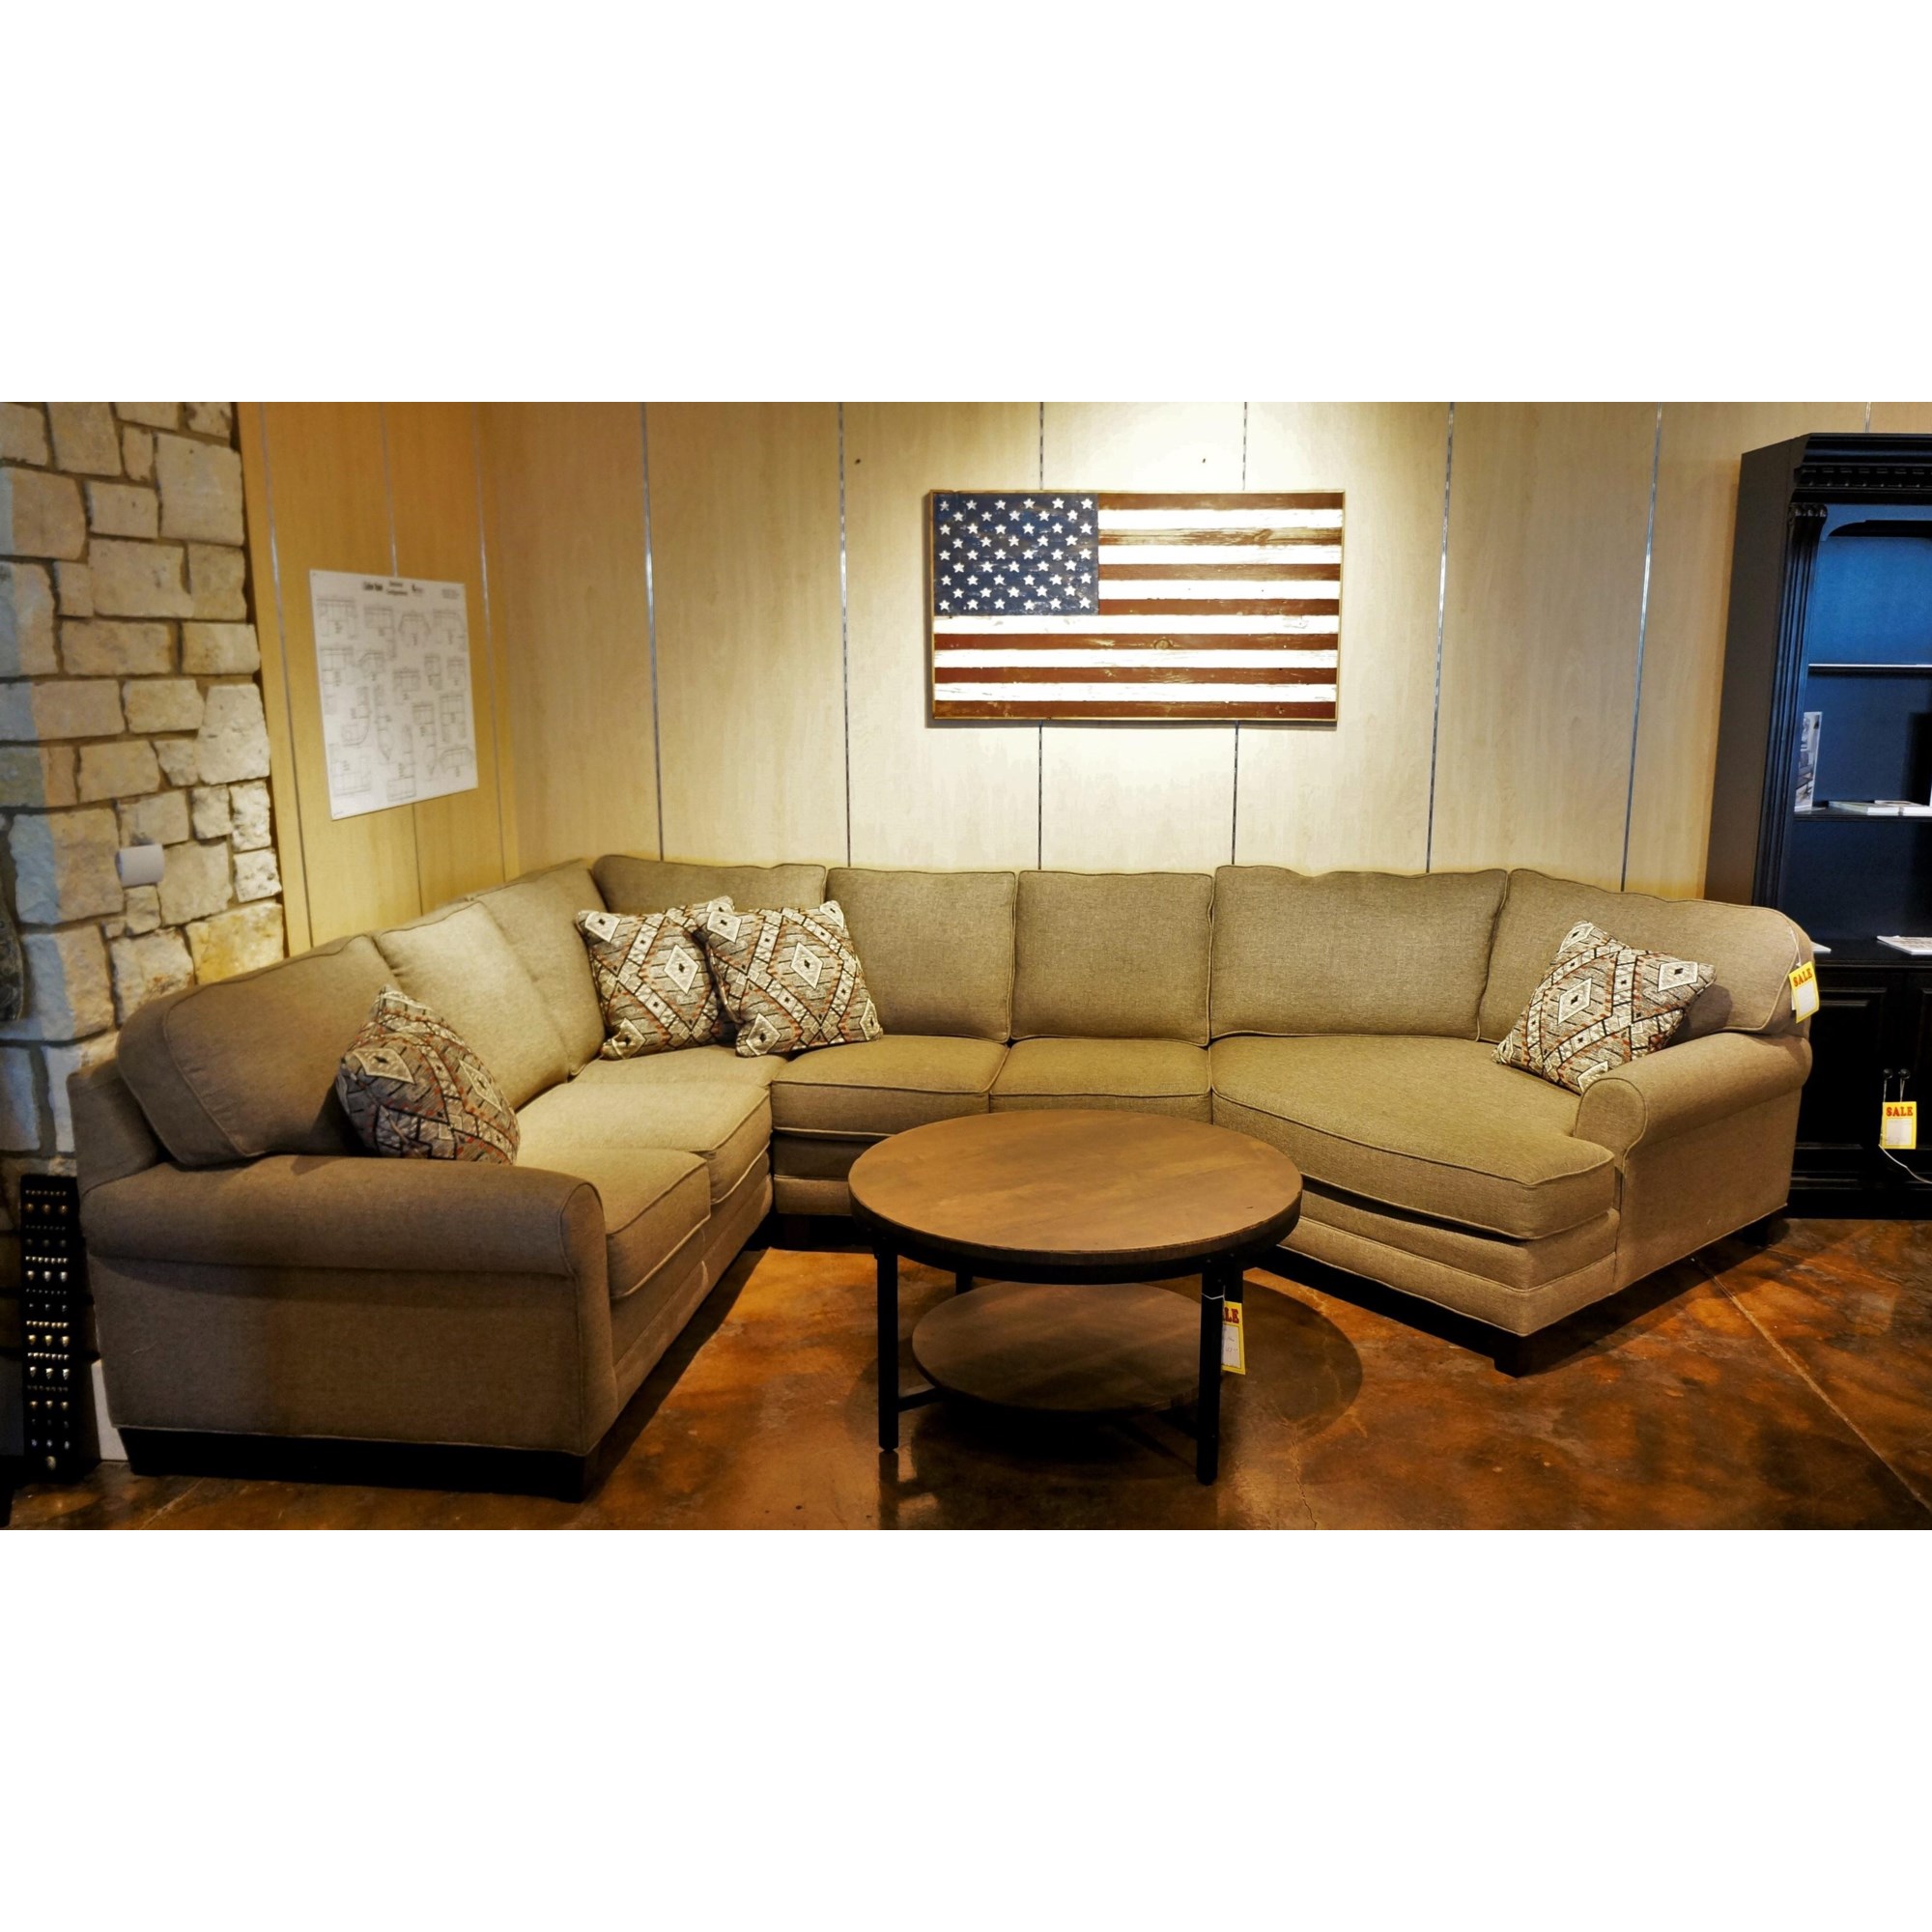 Temple Furniture Tailor Made 7700 Casual Sectional Sofa with Cuddle and  Exposed Wood Block Legs, Mueller Furniture